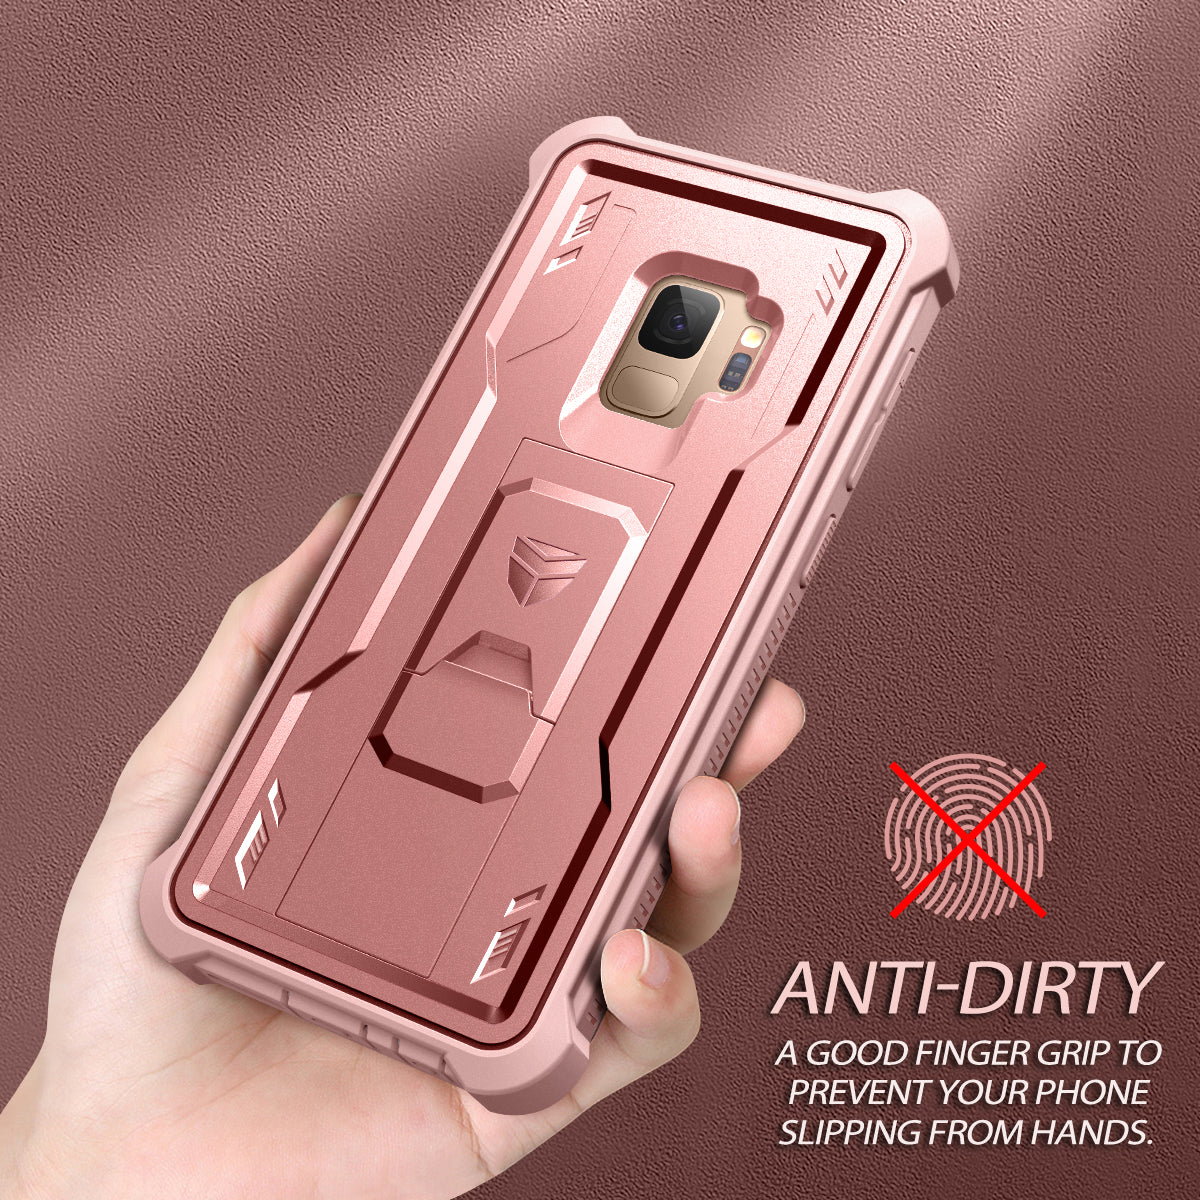 For Samsung Galaxy S9 case